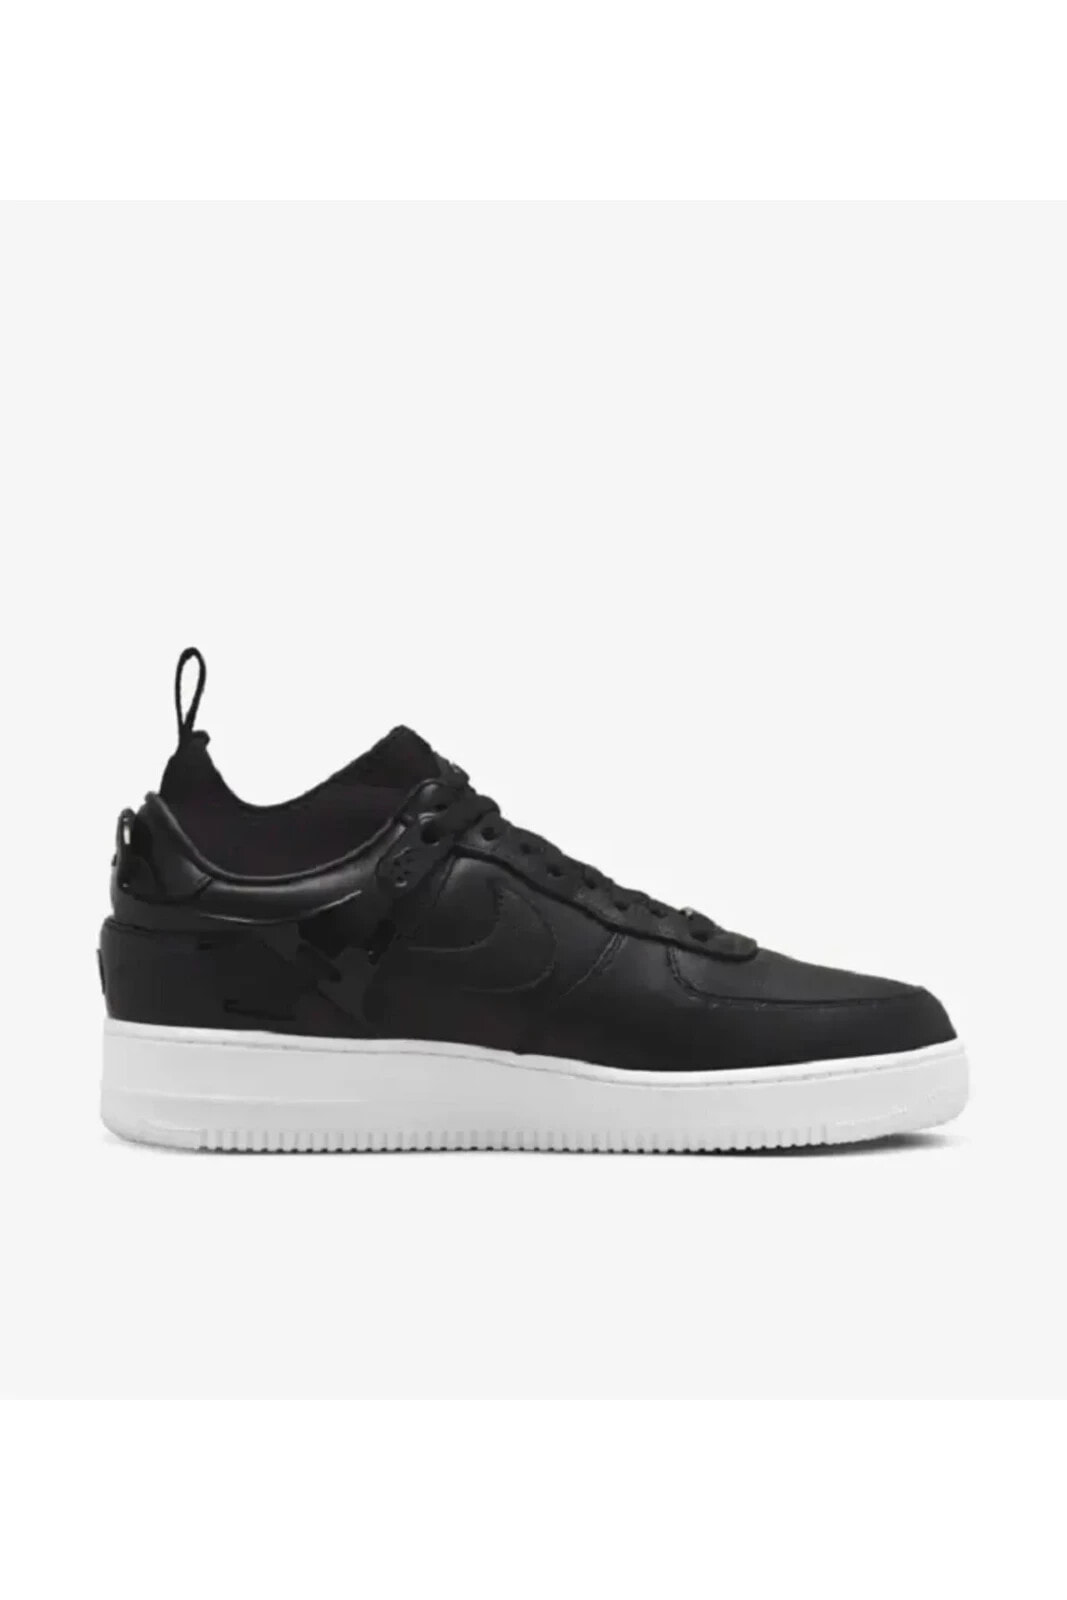 NİKE AIR FORCE 1 LOW SP UC DQ7558 002